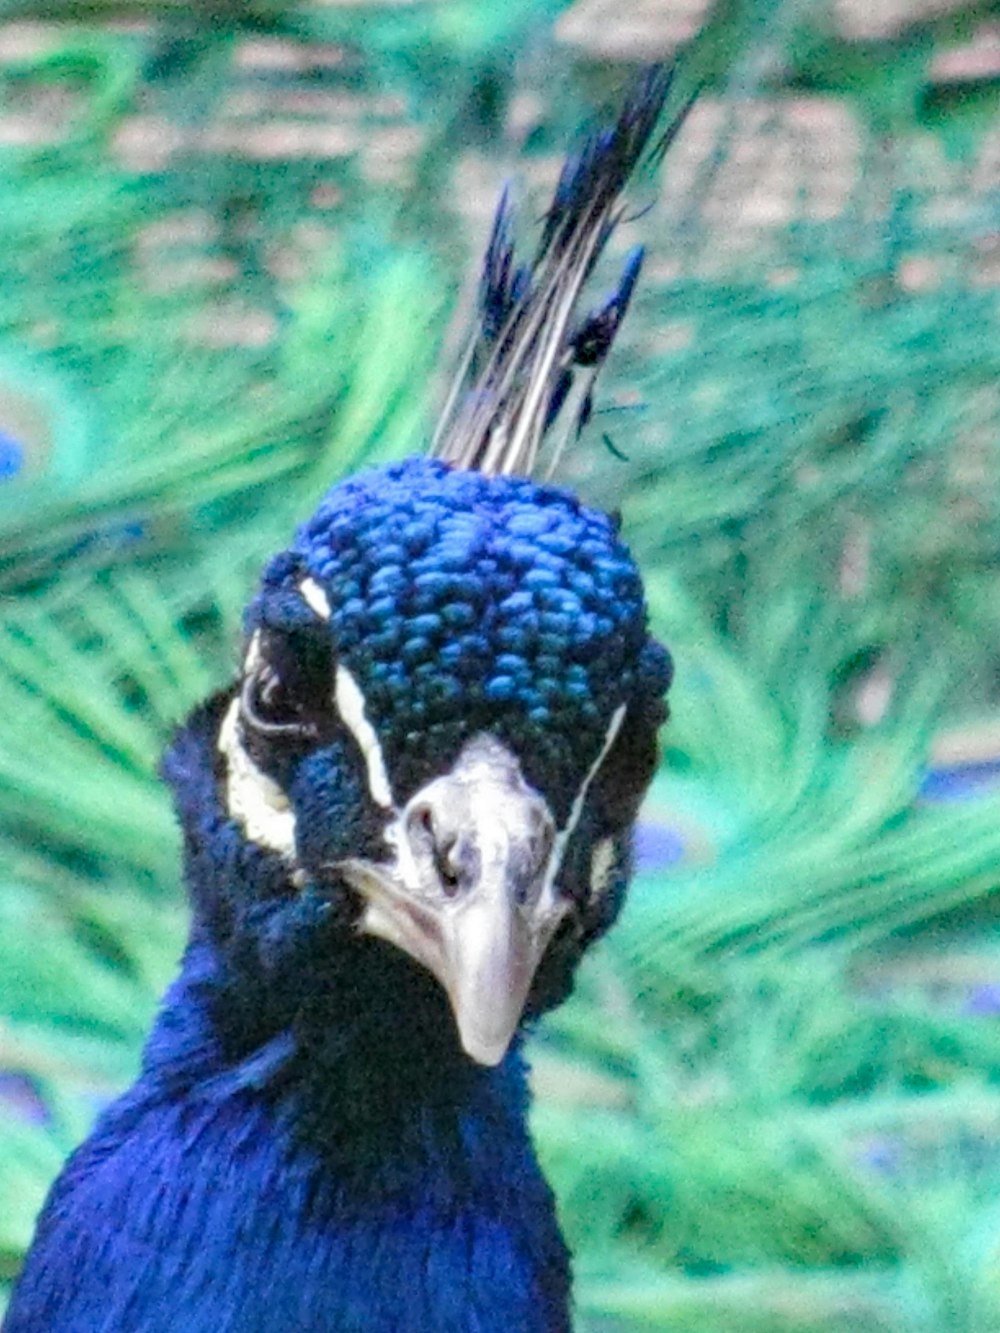 a close up of a blue bird with feathers on it's head